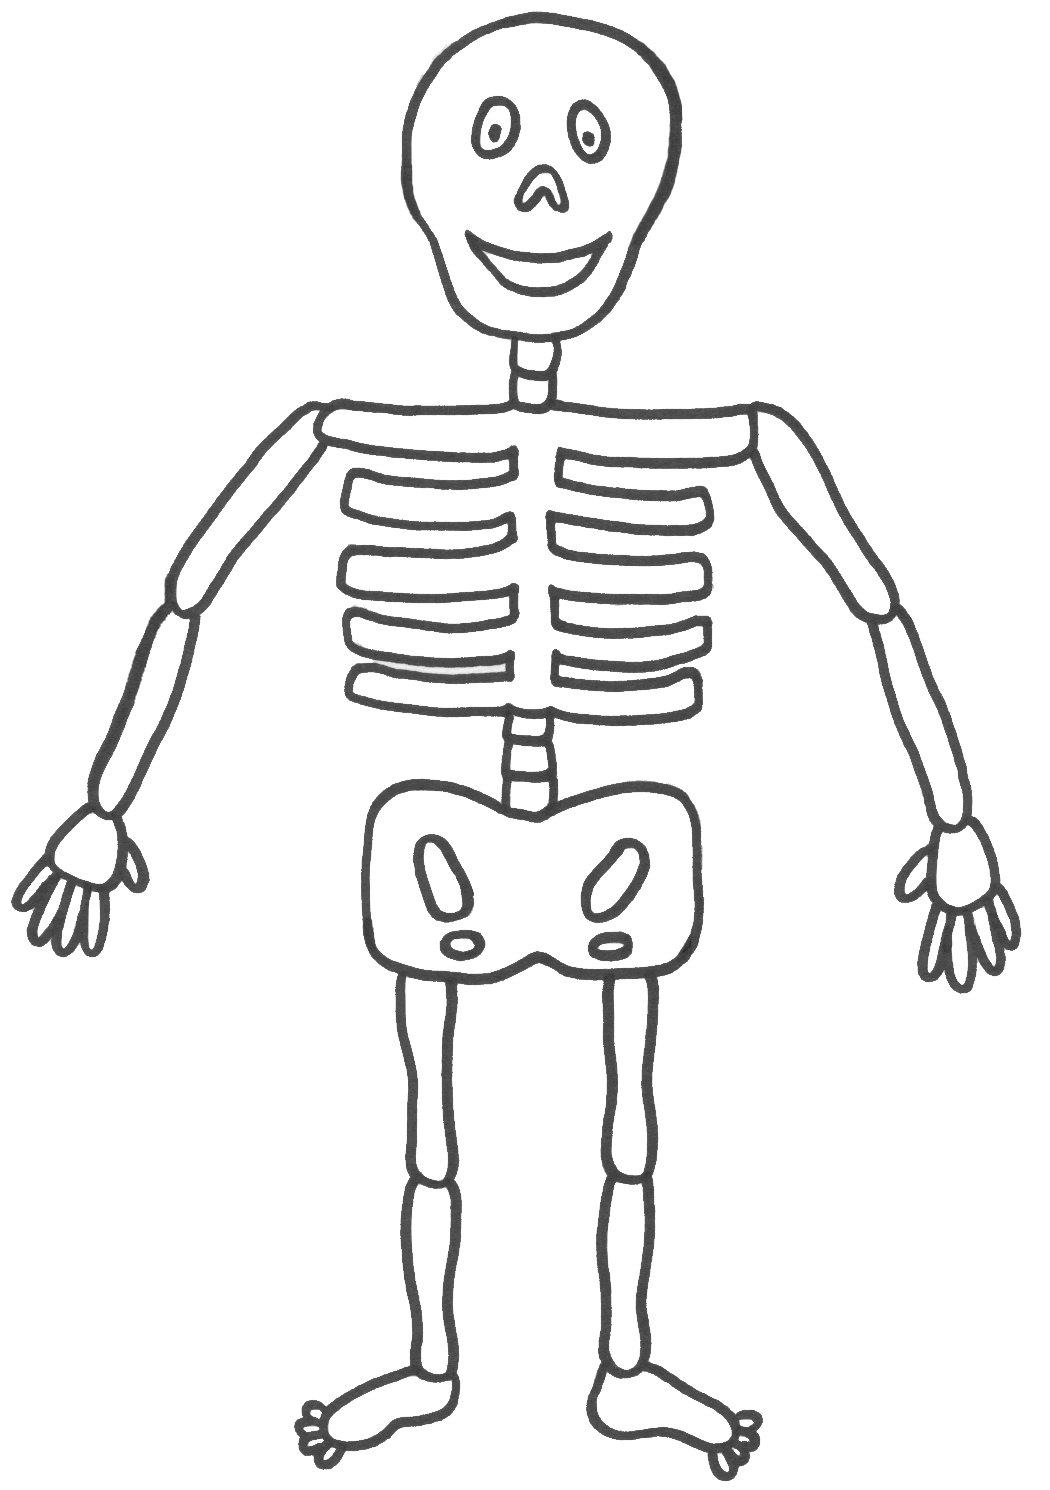 Free Skeleton Pictures For Kids, Download Free Clip Art